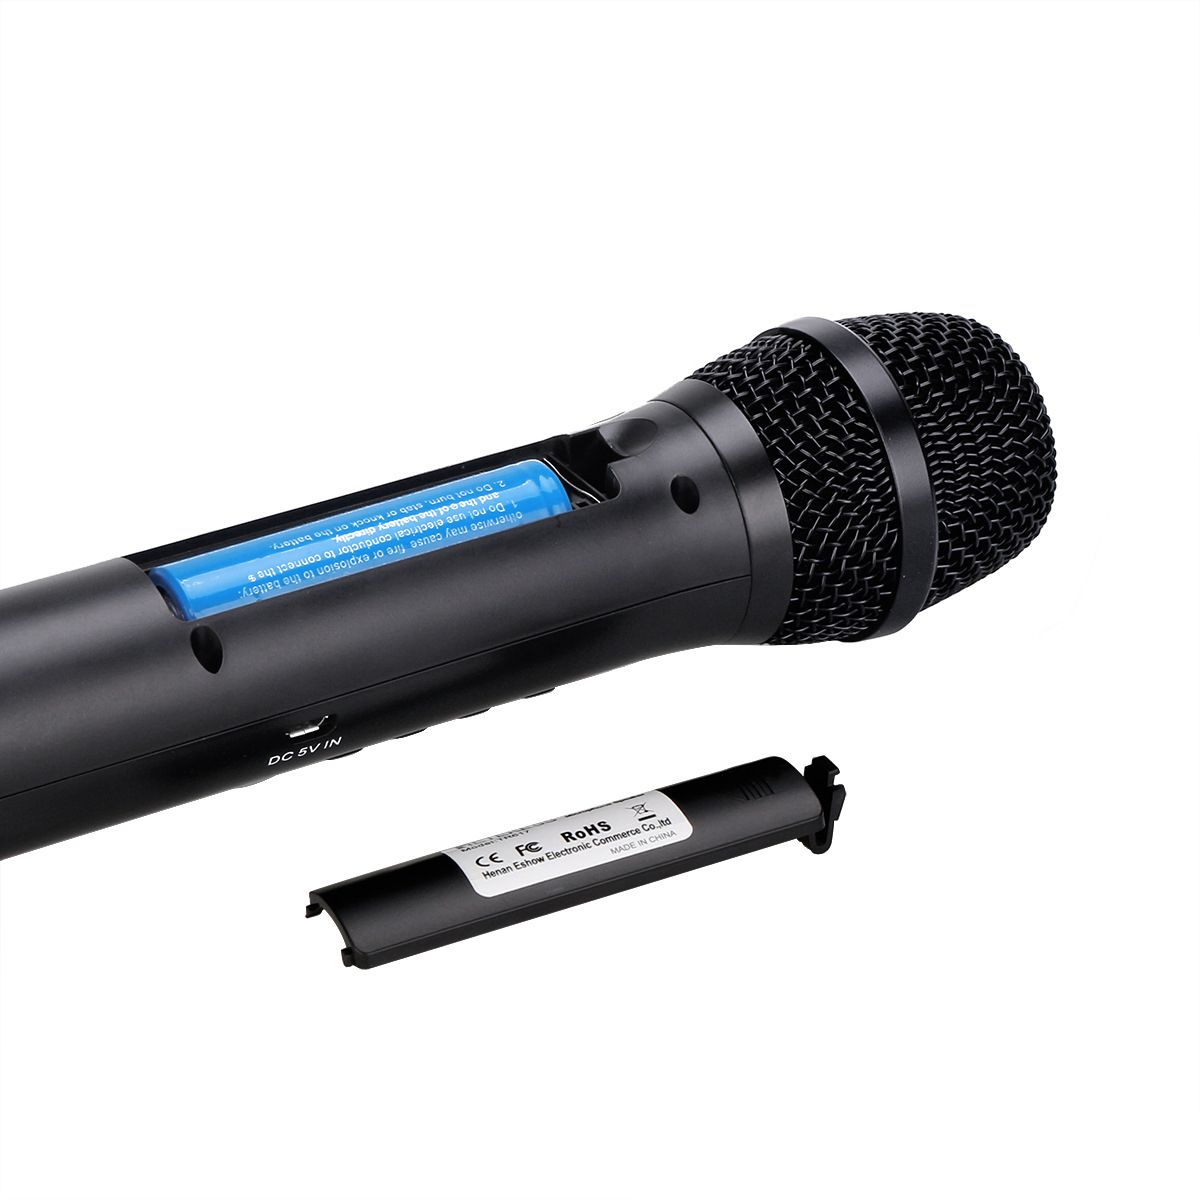 RETEKESS-TR617B-bluetooth-Wireless-DSP-Microphone-for-Live-Broadcast-Built-in-Speaker-Music-Player-M-1618918